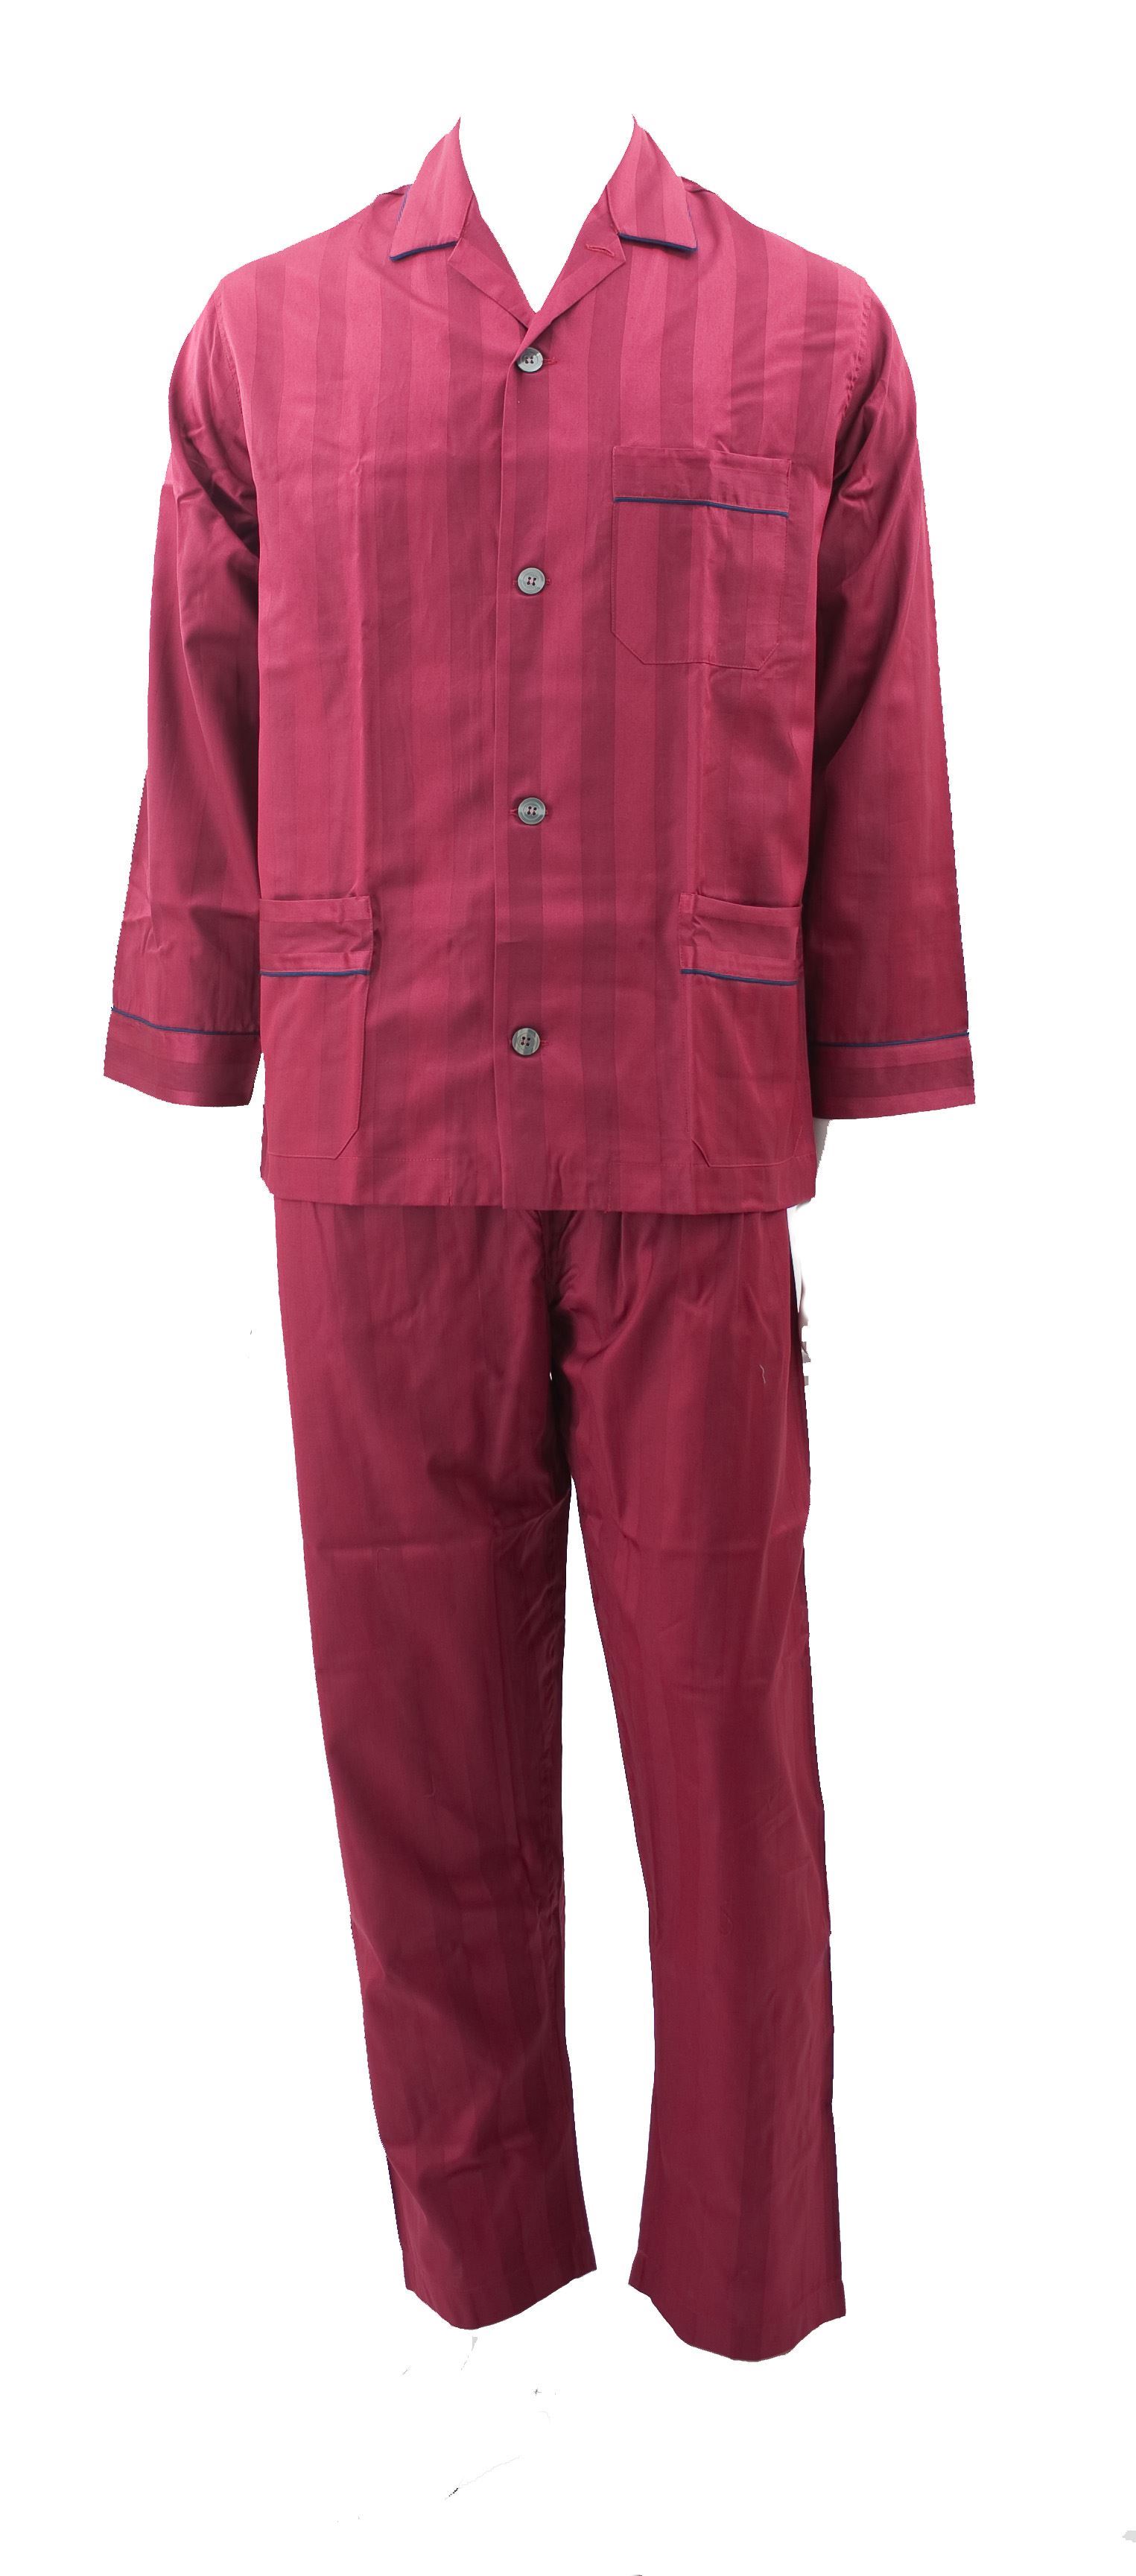 Picture of Men's Pajamas with buttons